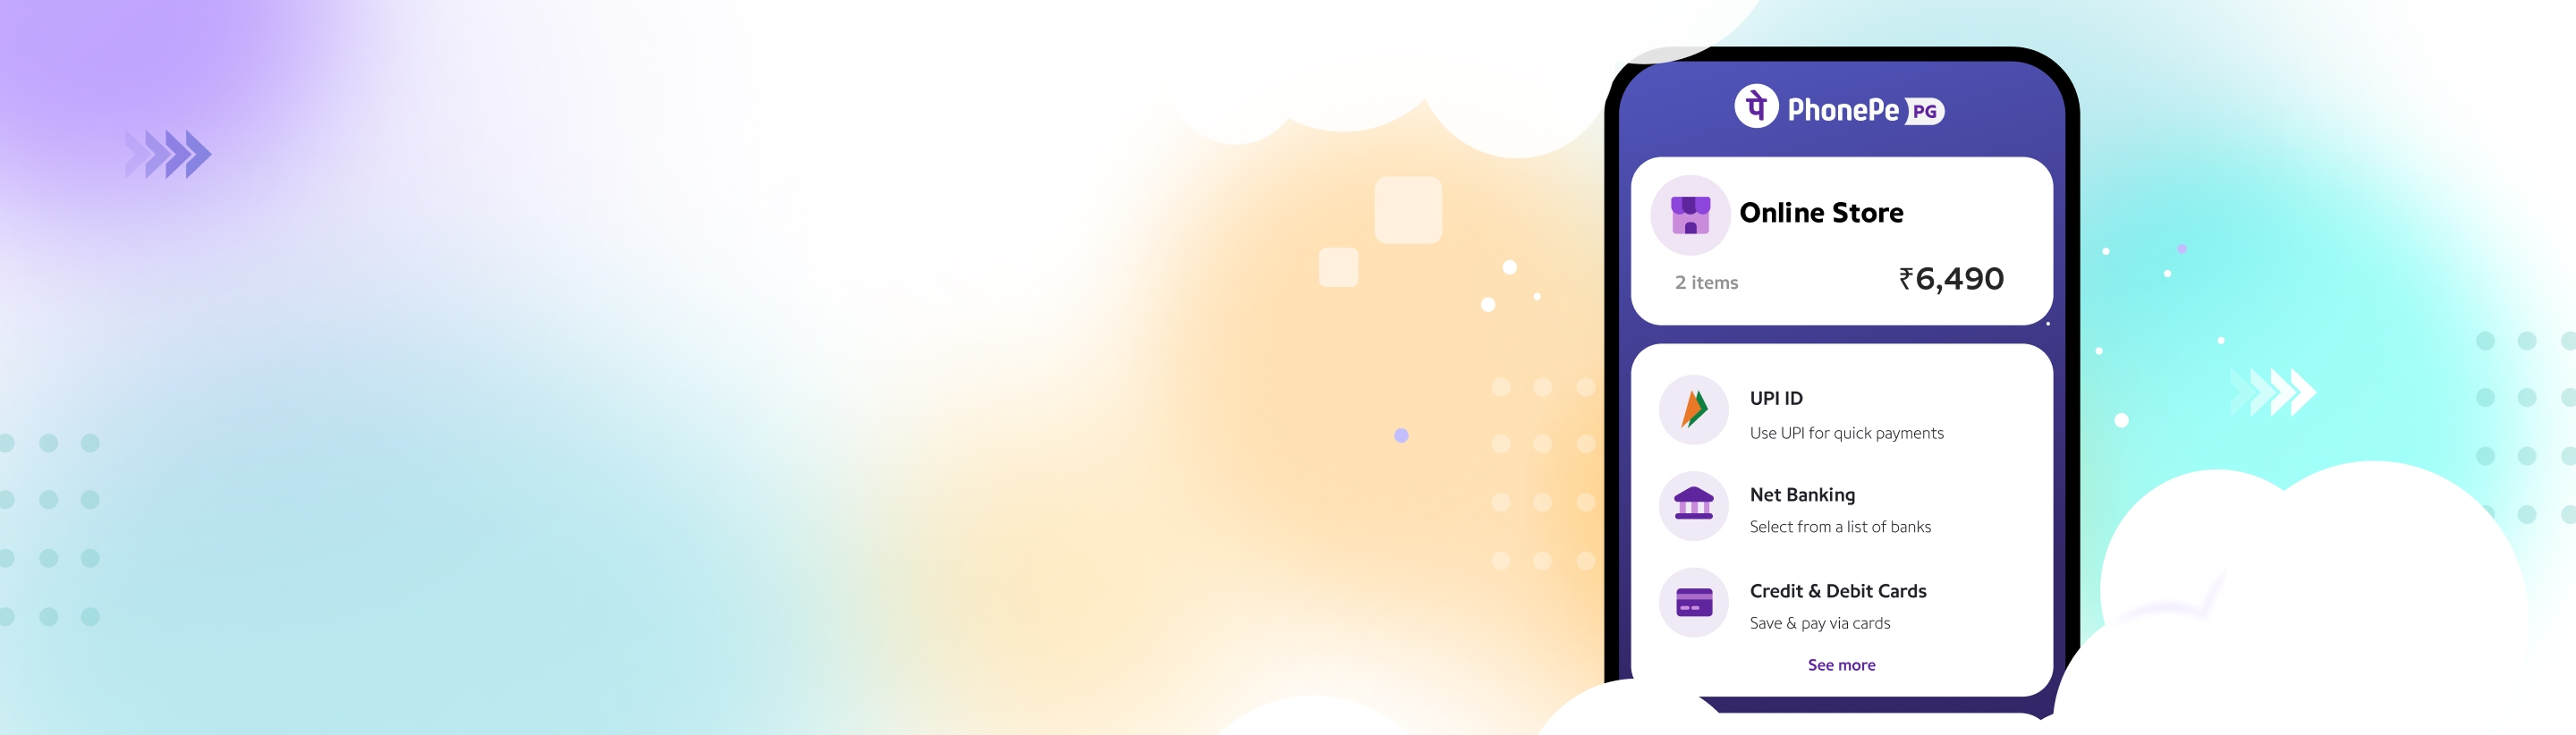 PhonePe Home Page Banner | Payment Gateway